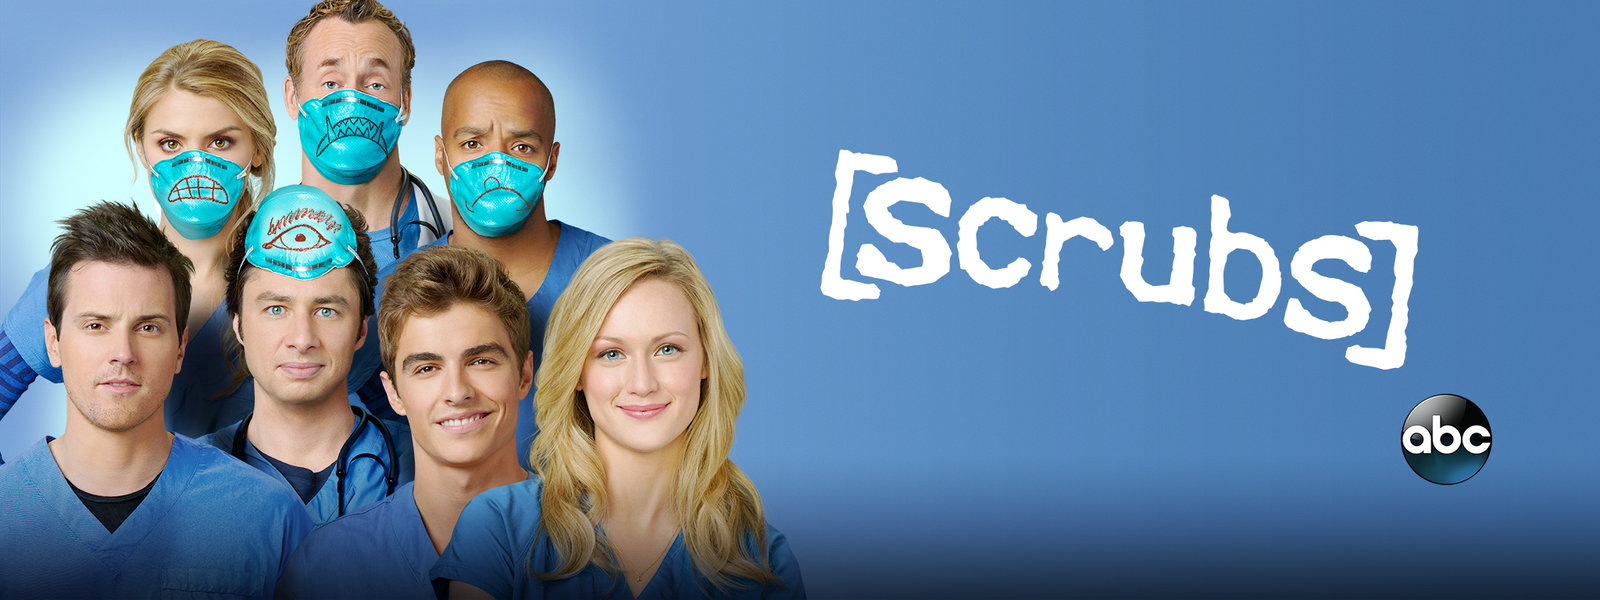 Banner for the hit series on hulu and abc scrubs